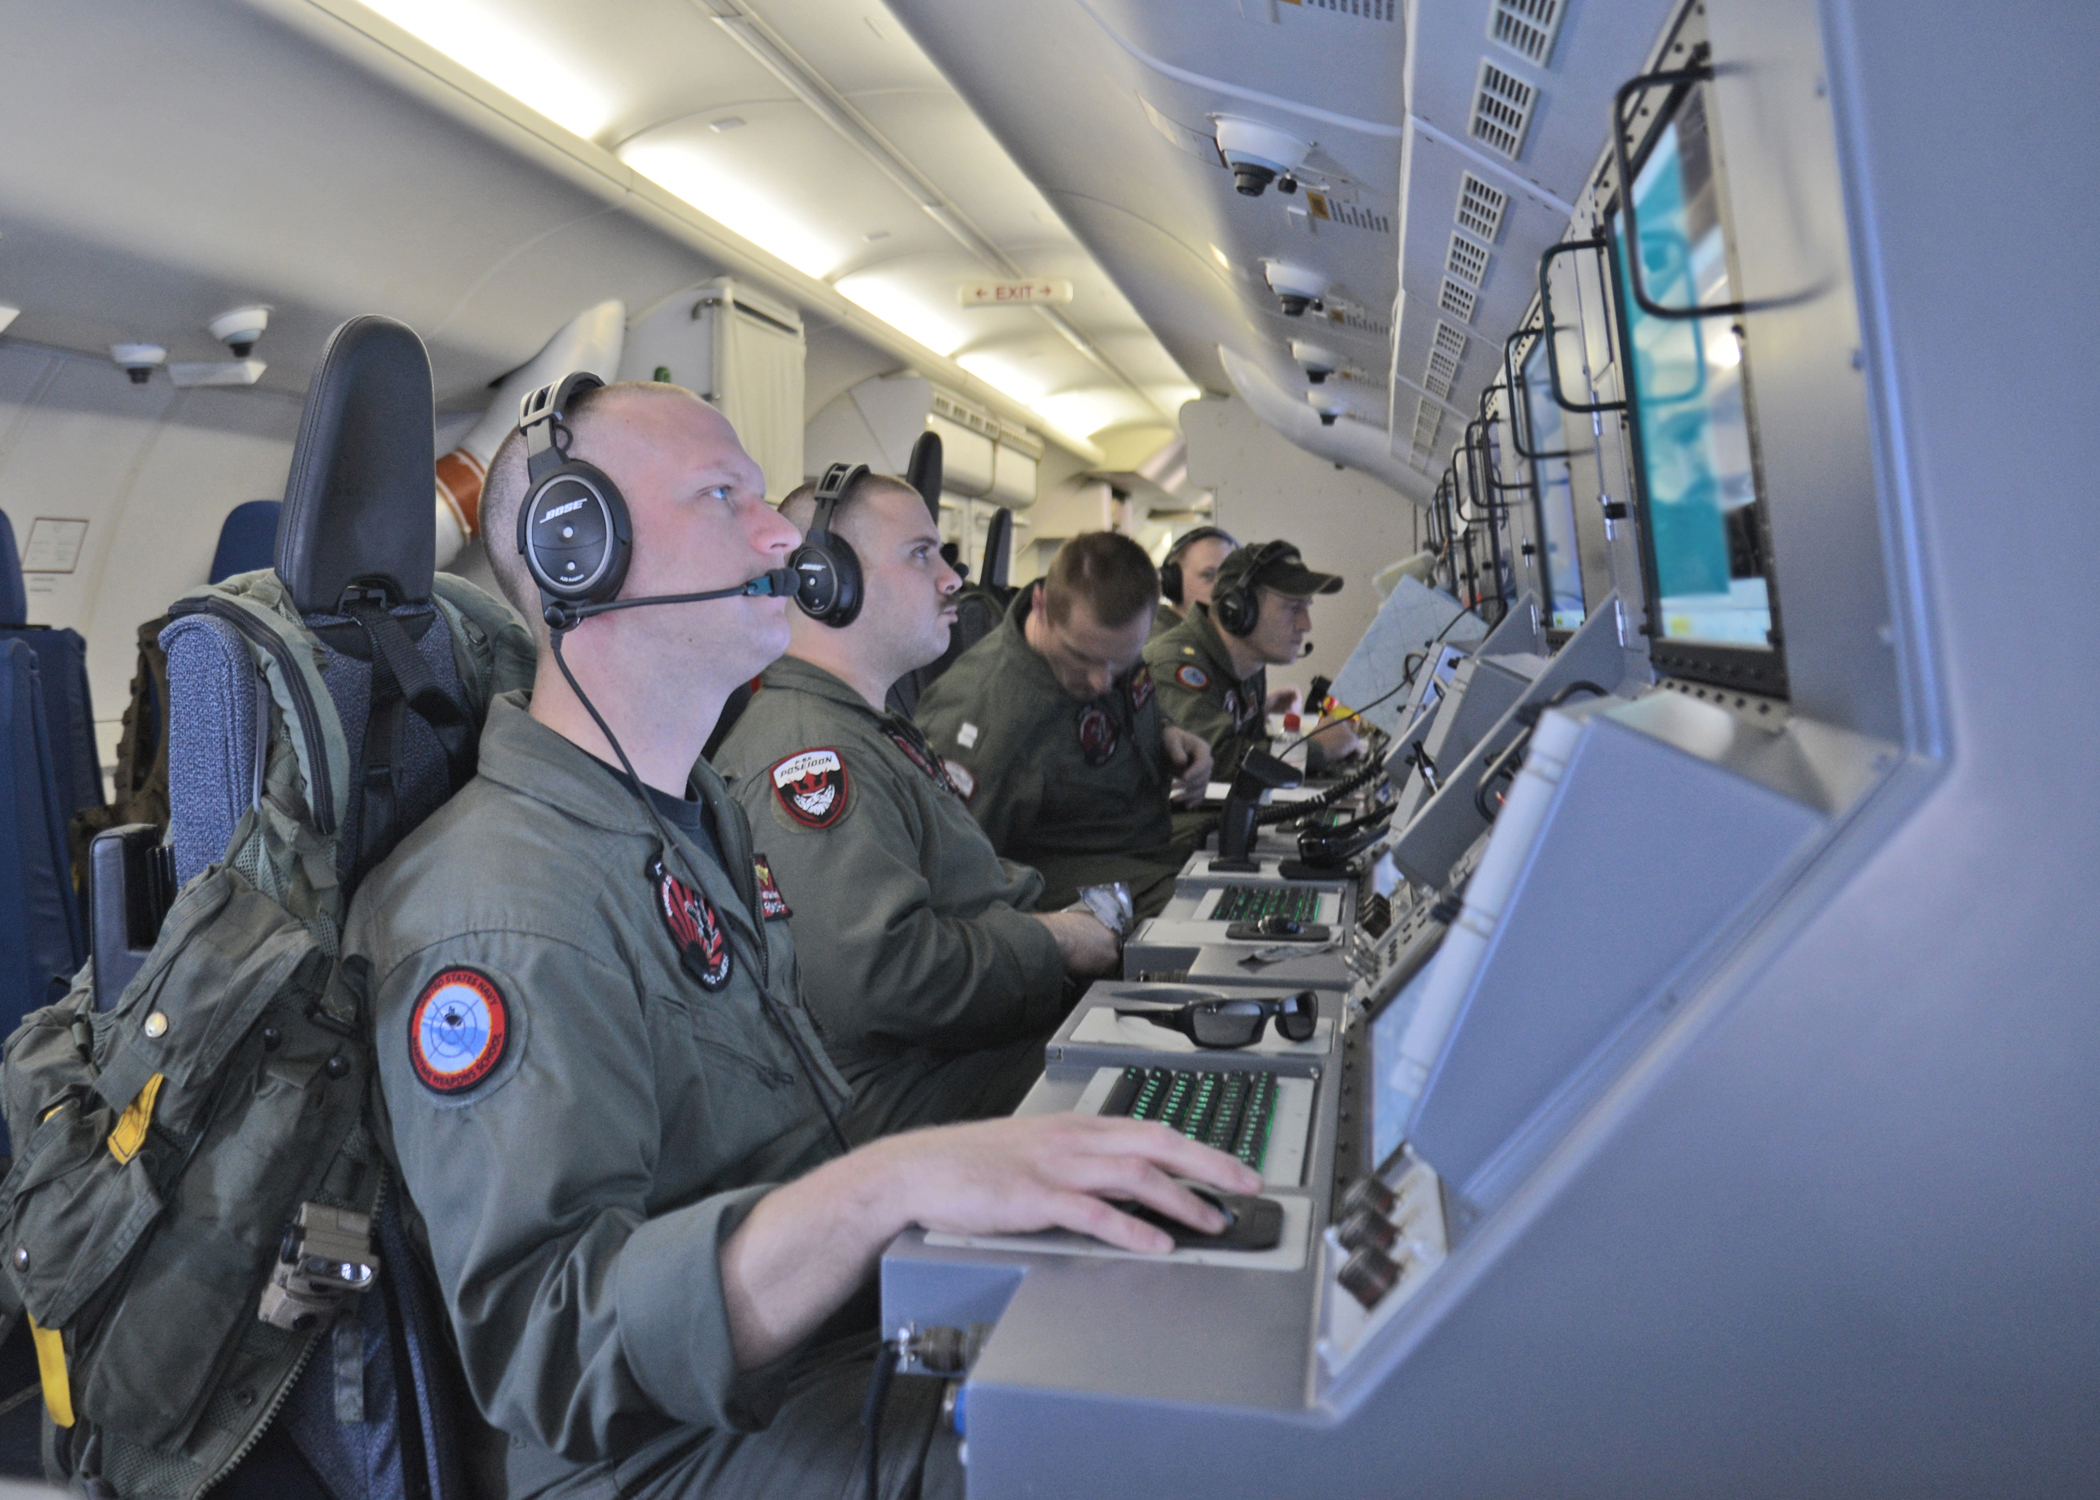 U.S._Navy_helps_search_for_Malaysia_Airlines_flight_MH370.jpg